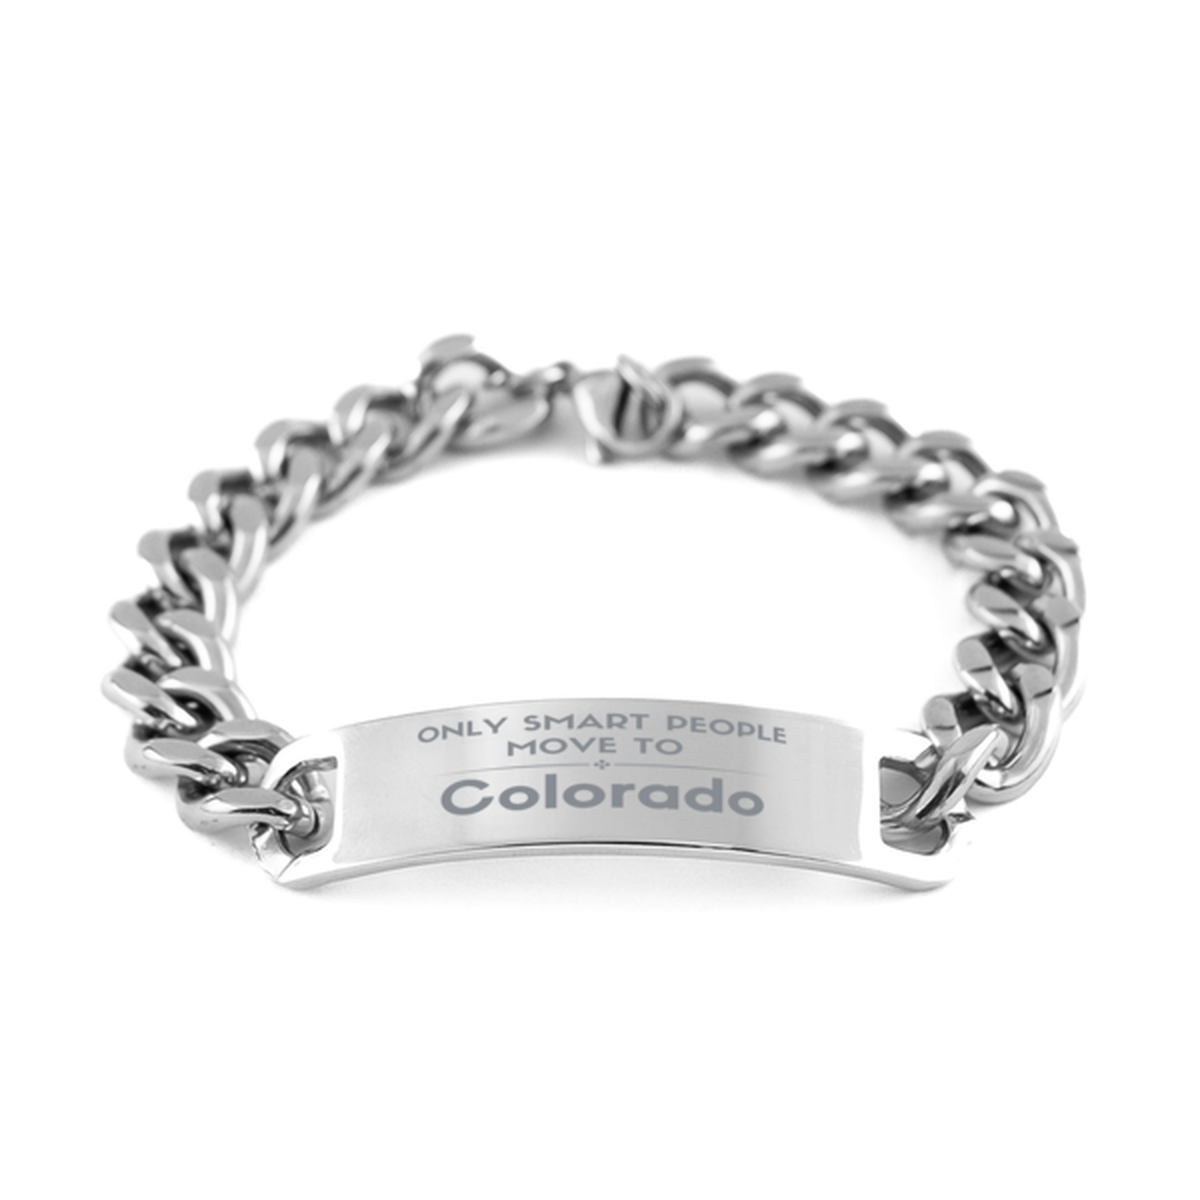 Only smart people move to Colorado Cuban Chain Stainless Steel Bracelet, Gag Gifts For Colorado, Move to Colorado Gifts for Friends Coworker Funny Saying Quote